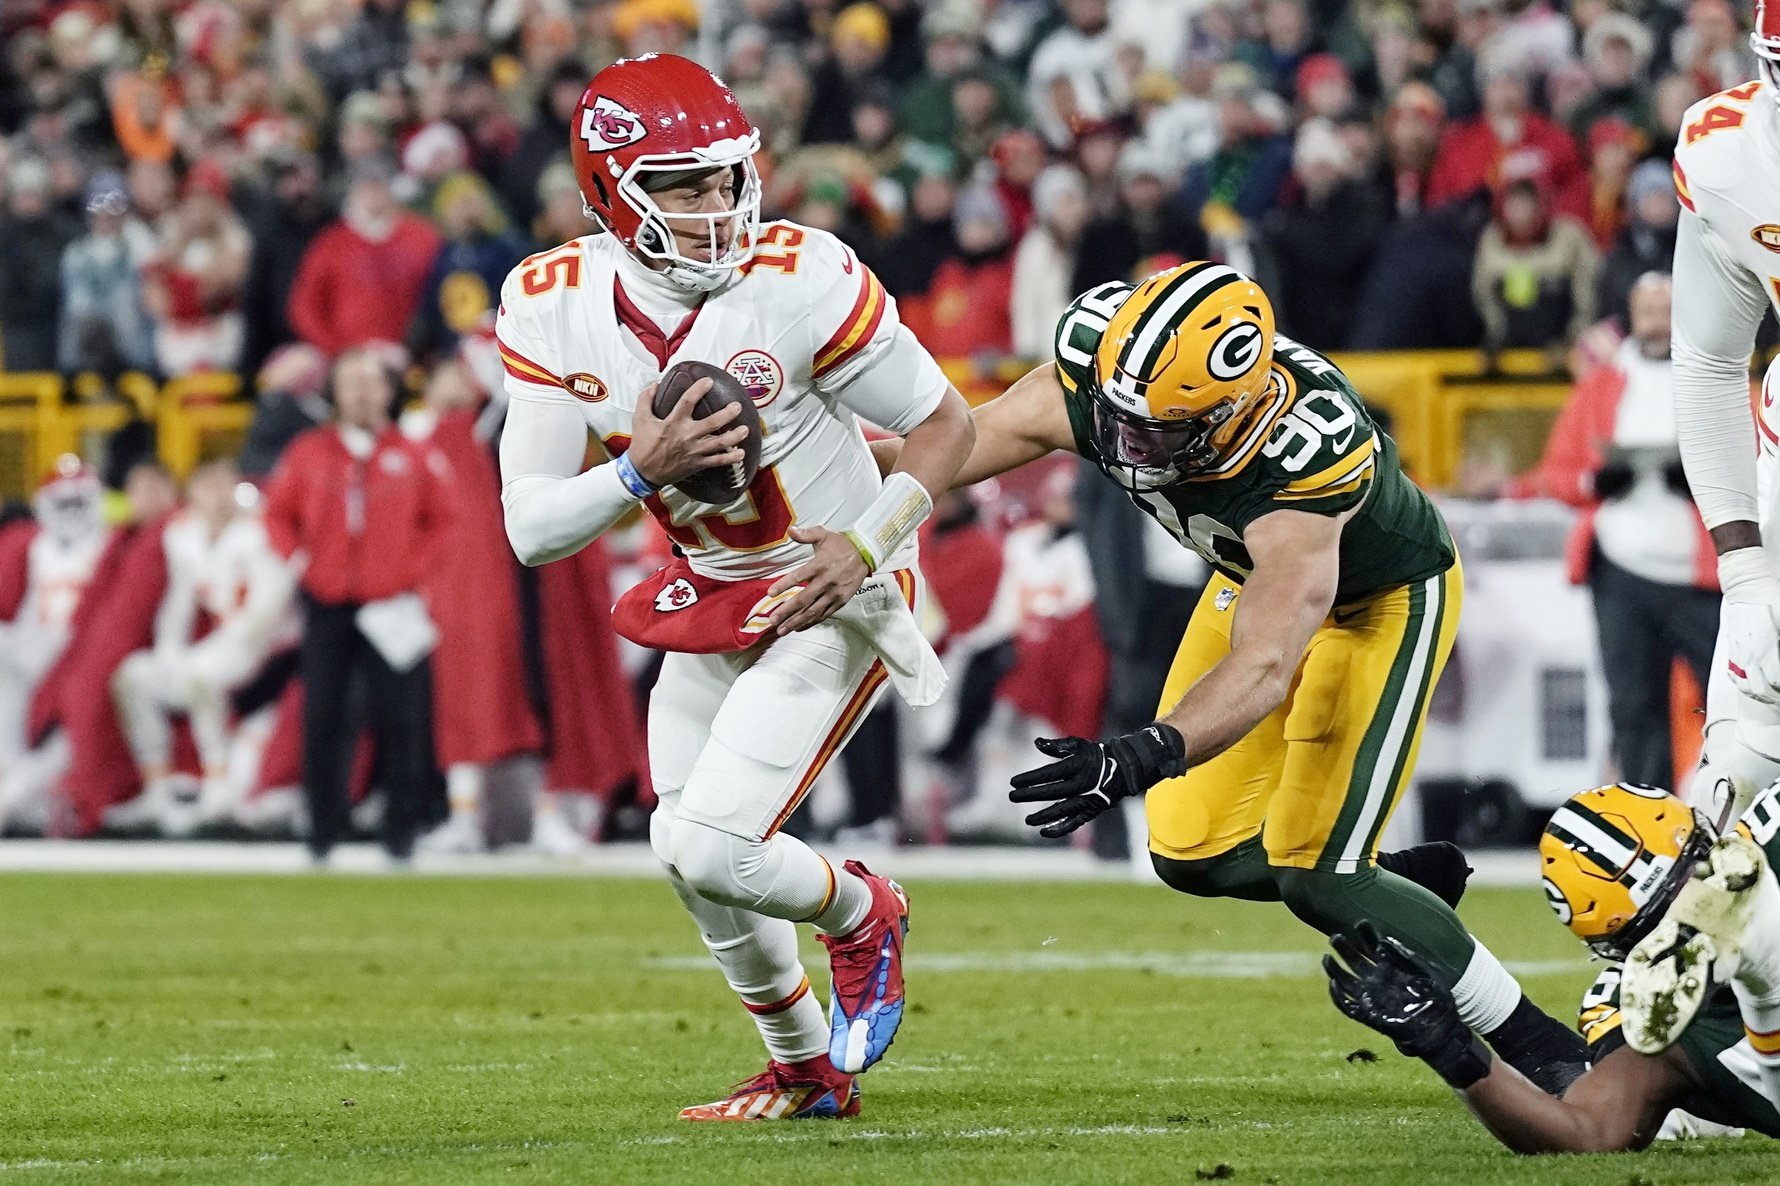 Kansas City Chiefs QB Patrick Mahomes (15) moves with the ball against the Green Bay Packers.